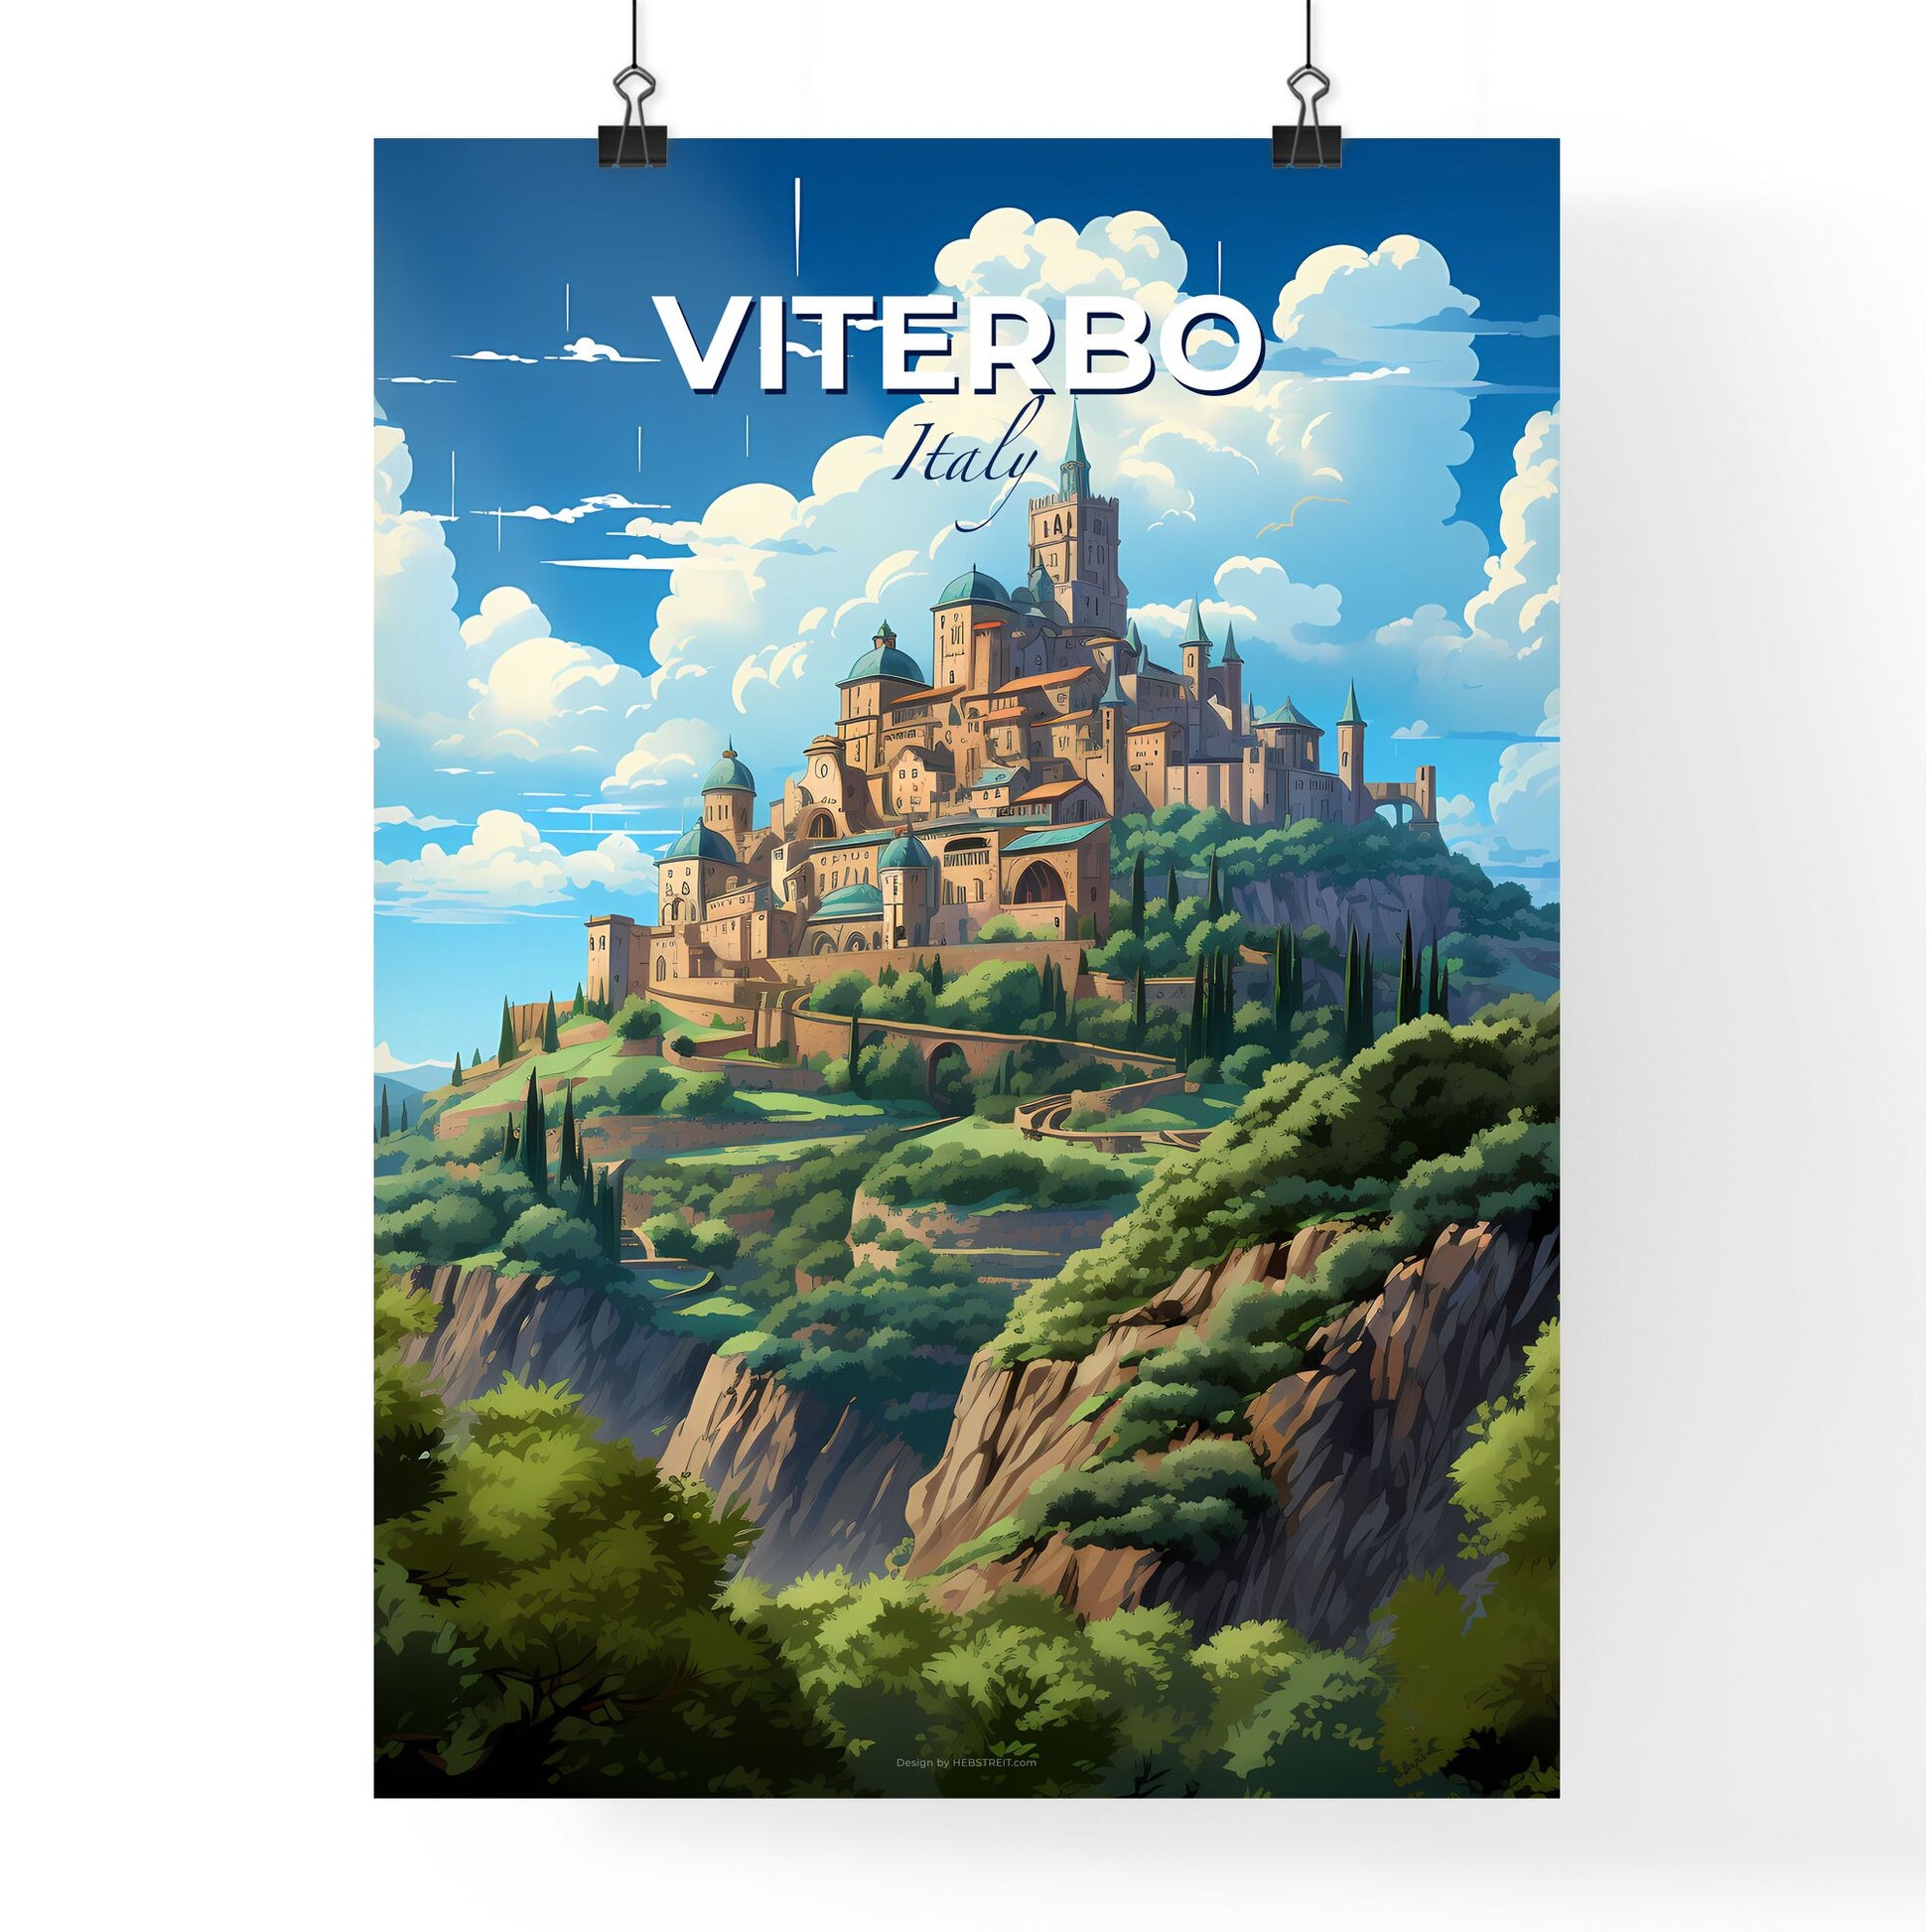 Viterbo, Italy, A Poster of a castle on a hill Default Title